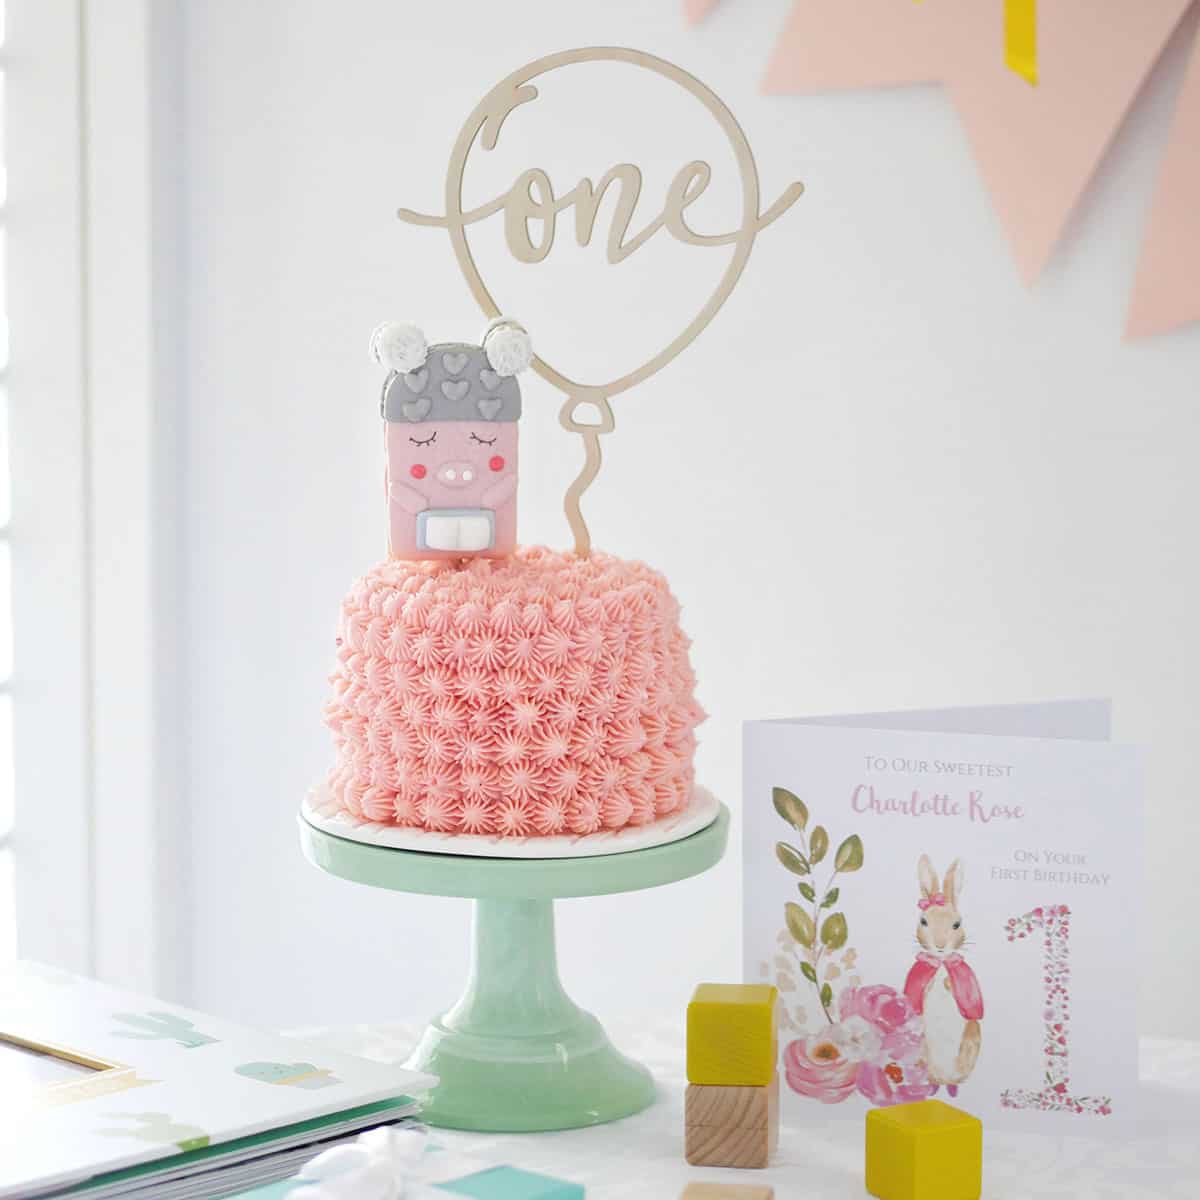 A decorated smash cake on a cake stand with a birthday card on the side.